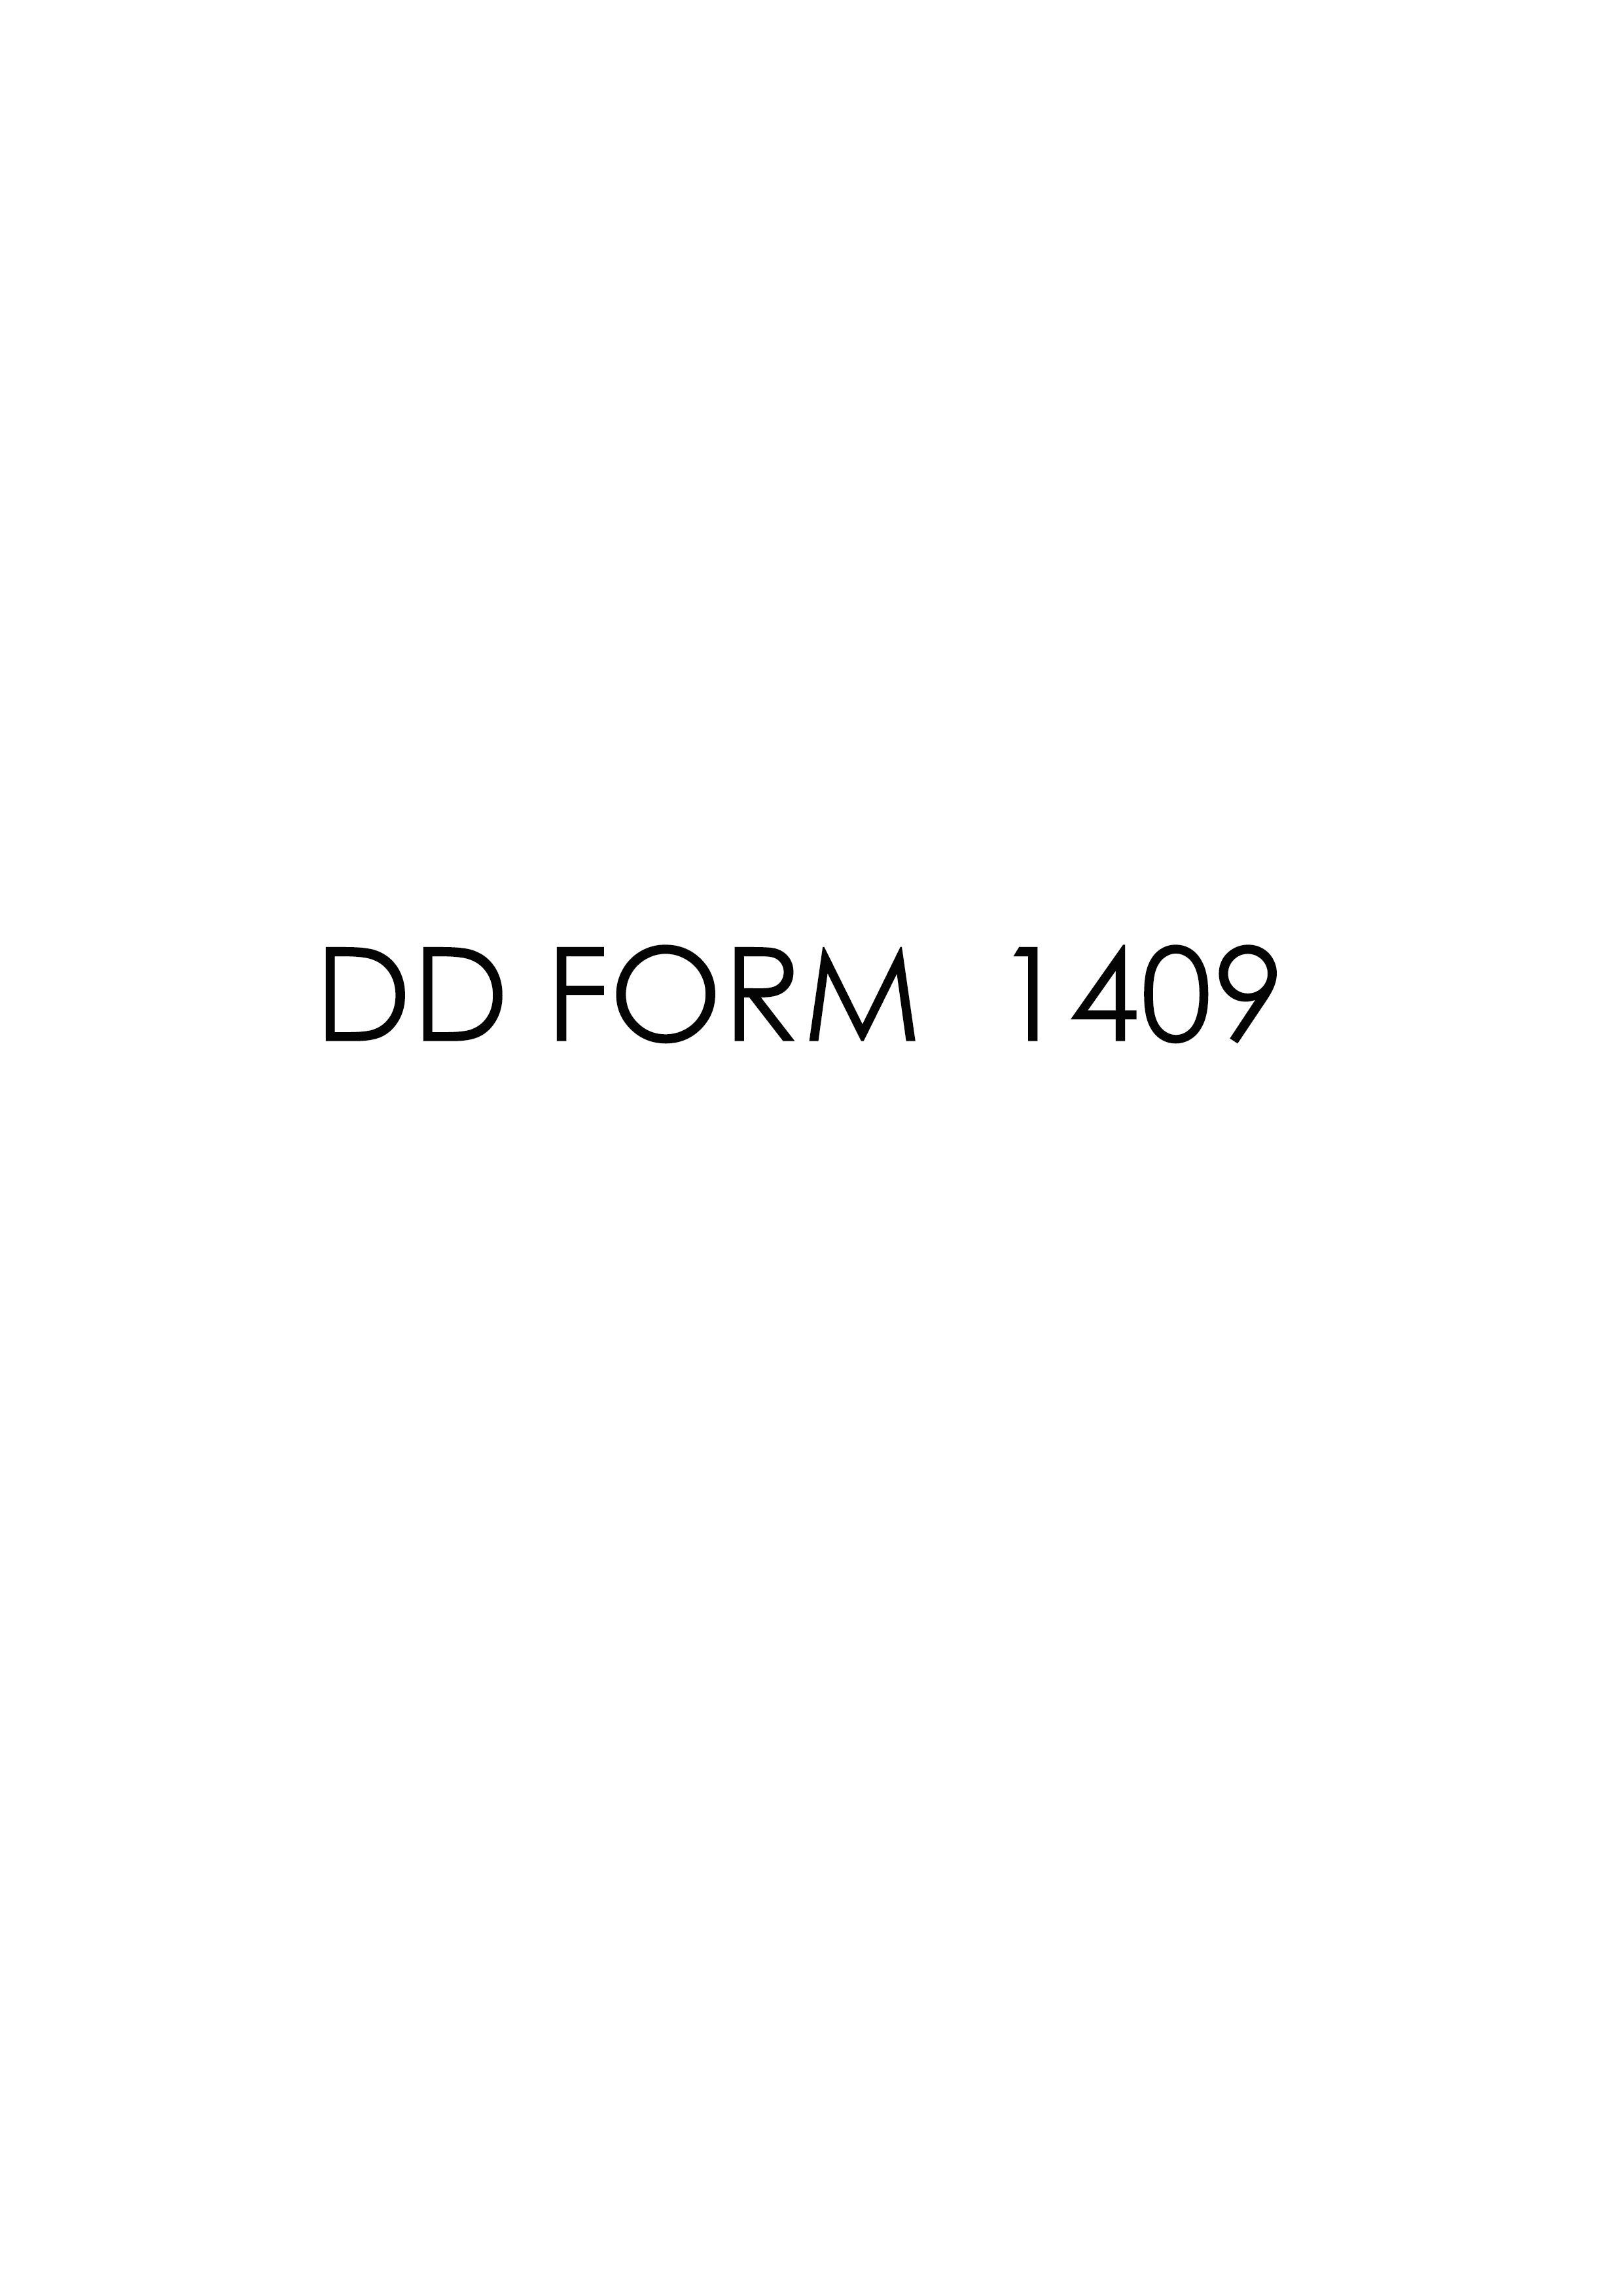 Download Fillable dd Form 1409